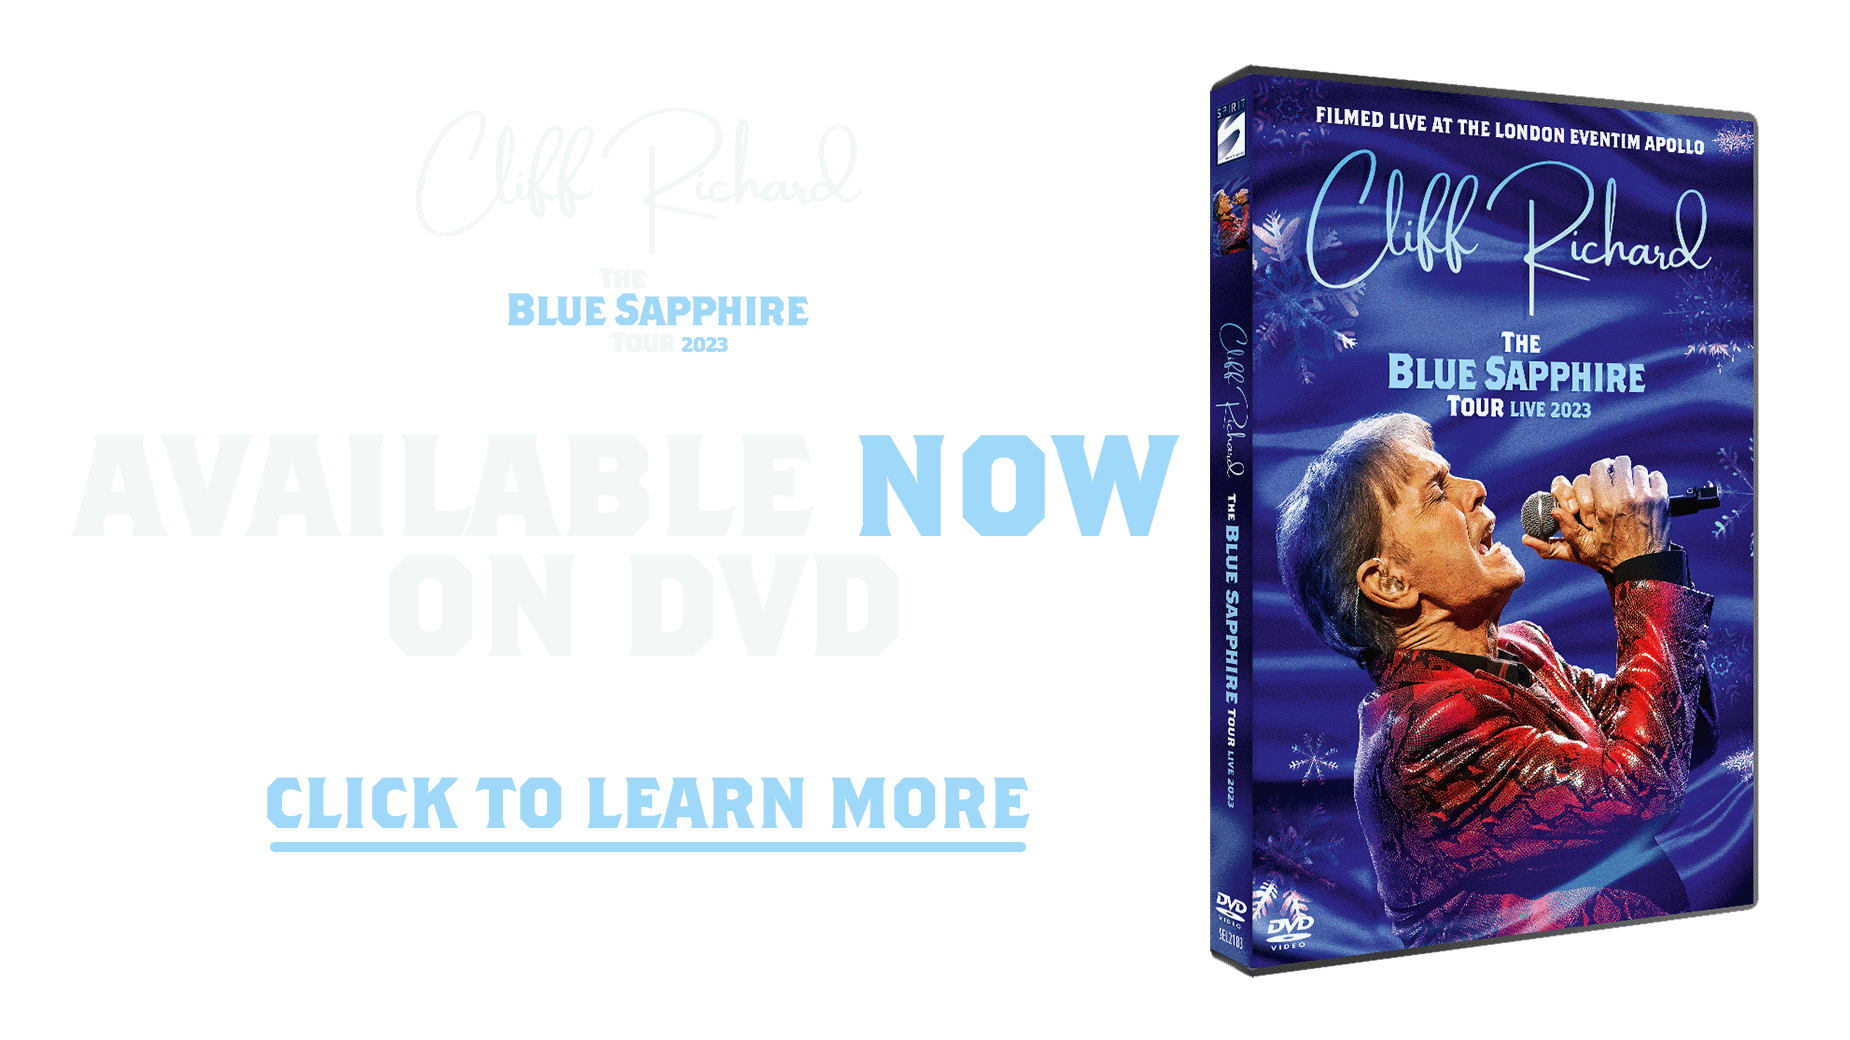 The Blue Sapphire Tour Live 2023 DVD - available now